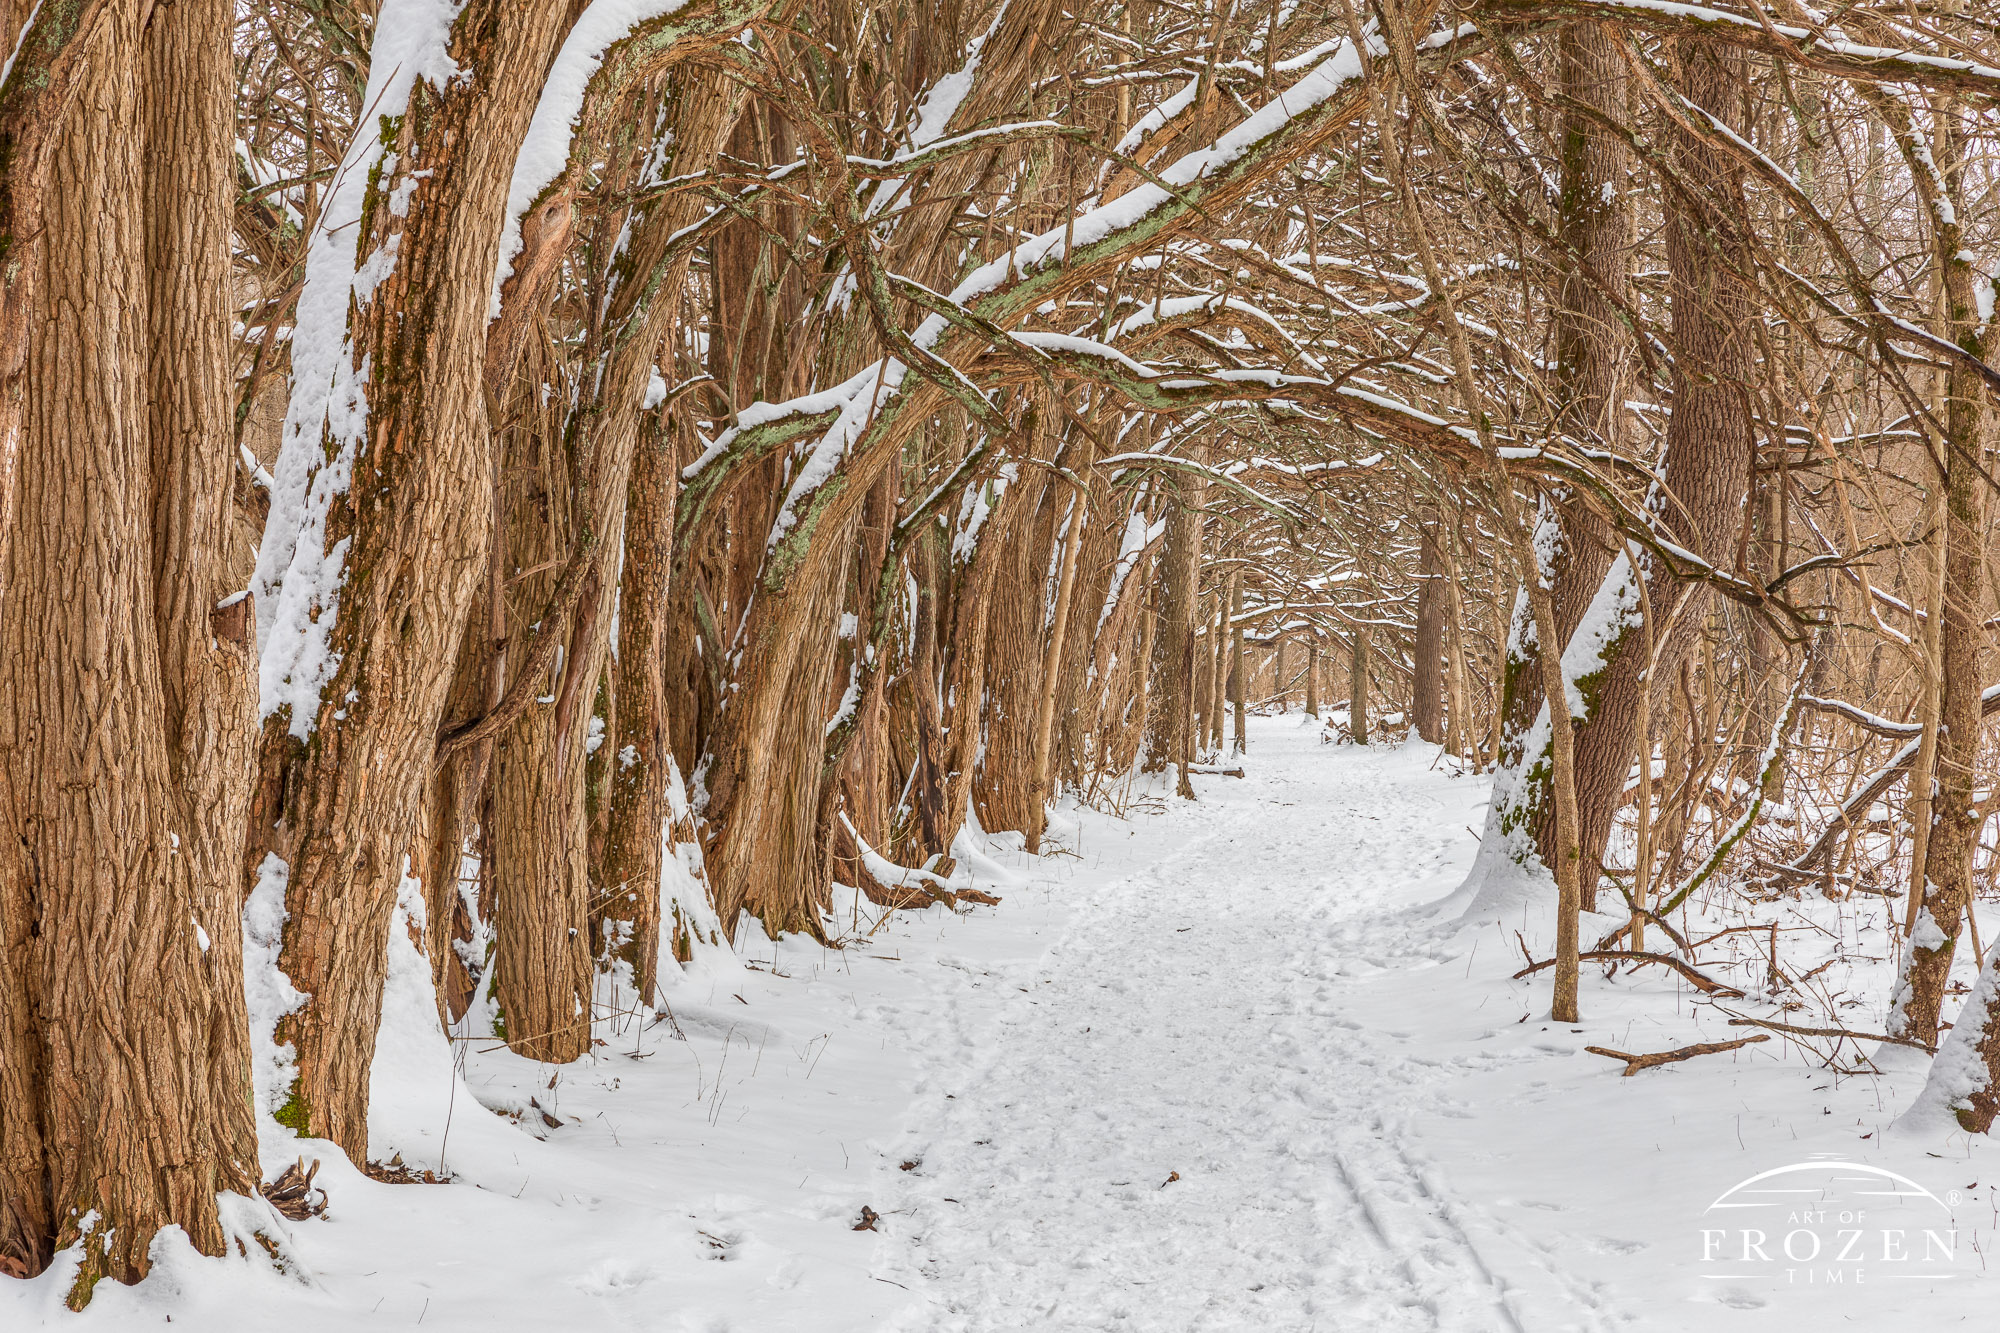 A straight trail extending to the midground is bounded by Osage Orange trees arching over this snowy path forming a natural woodland tunnel